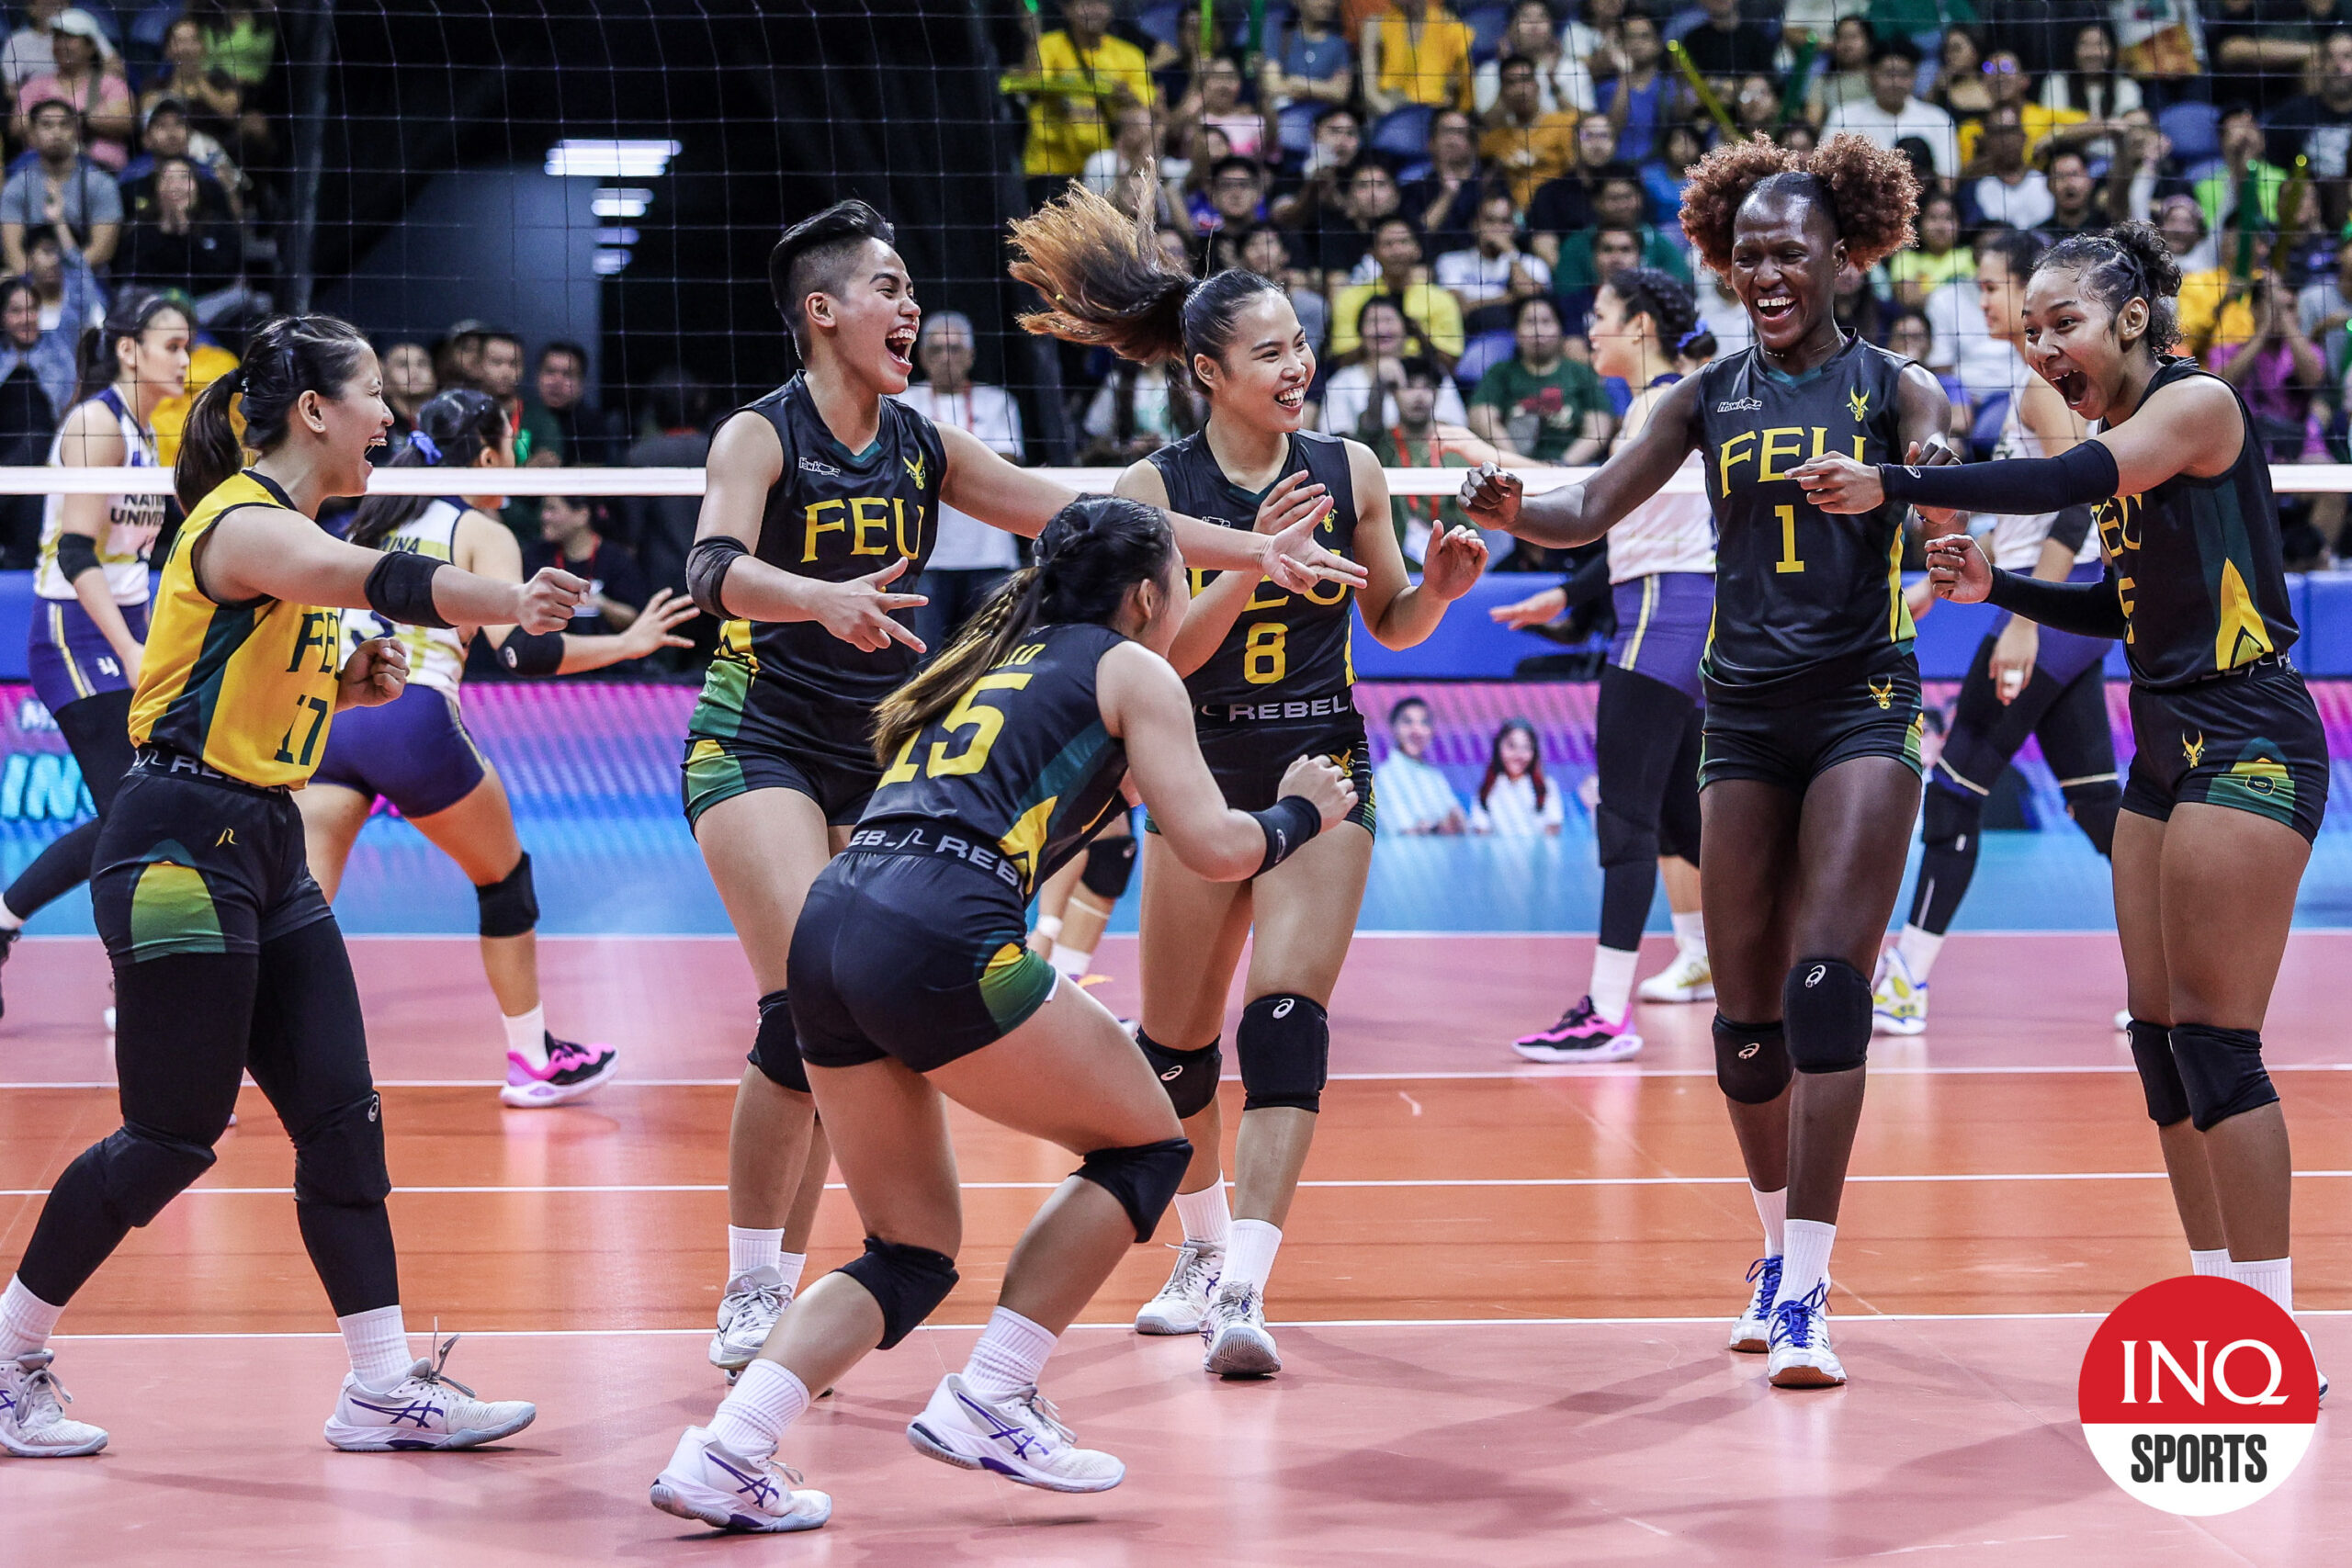 uaap women’s volleyball: feu forces final four decider, upsets nu